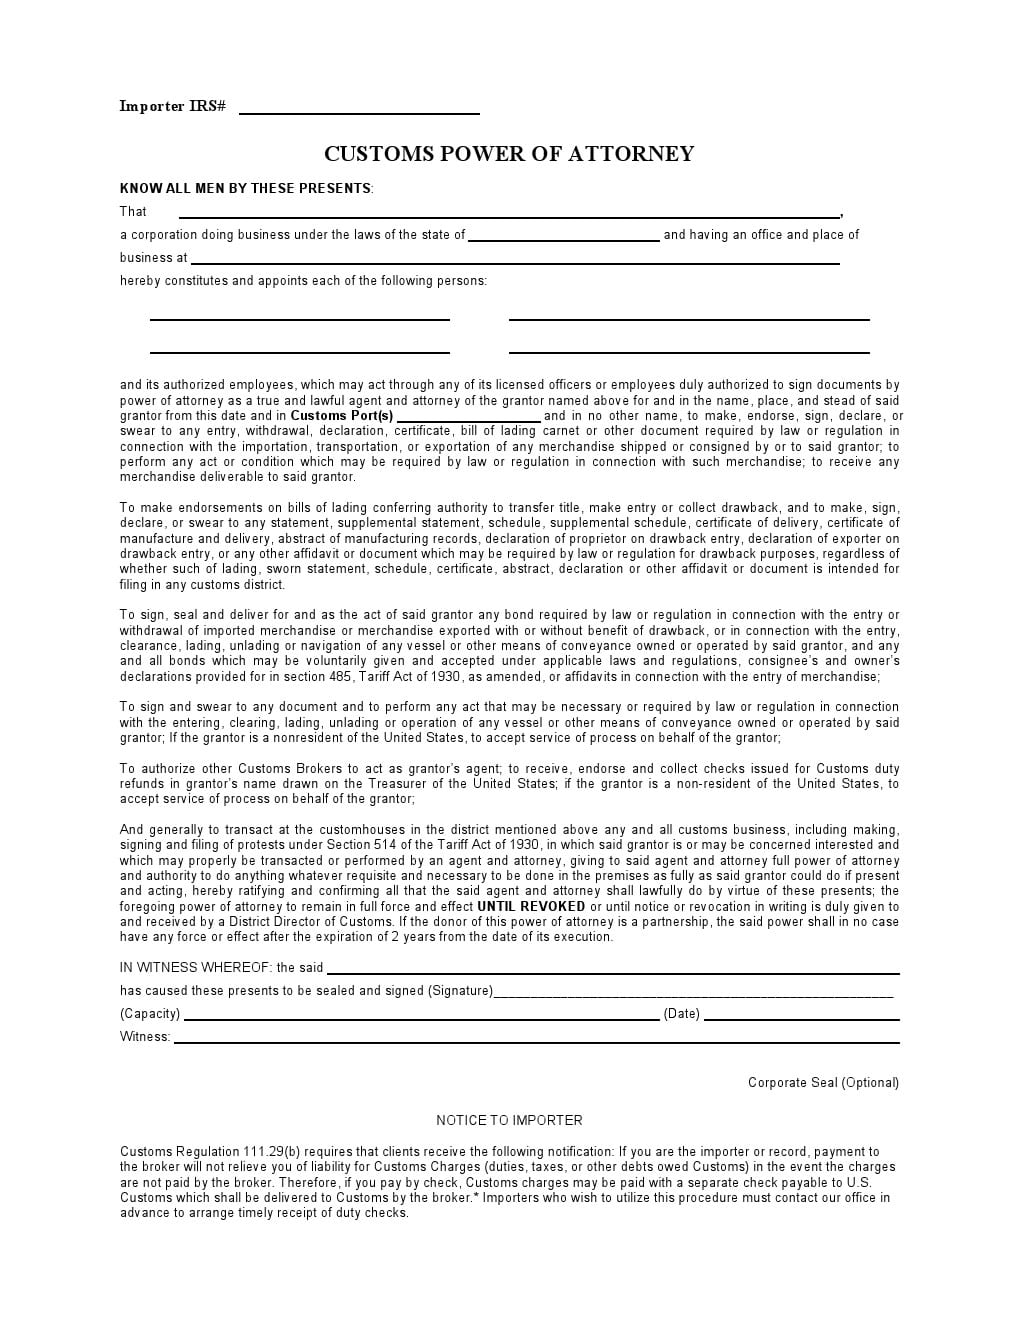 Free Customs Power of Attorney Forms